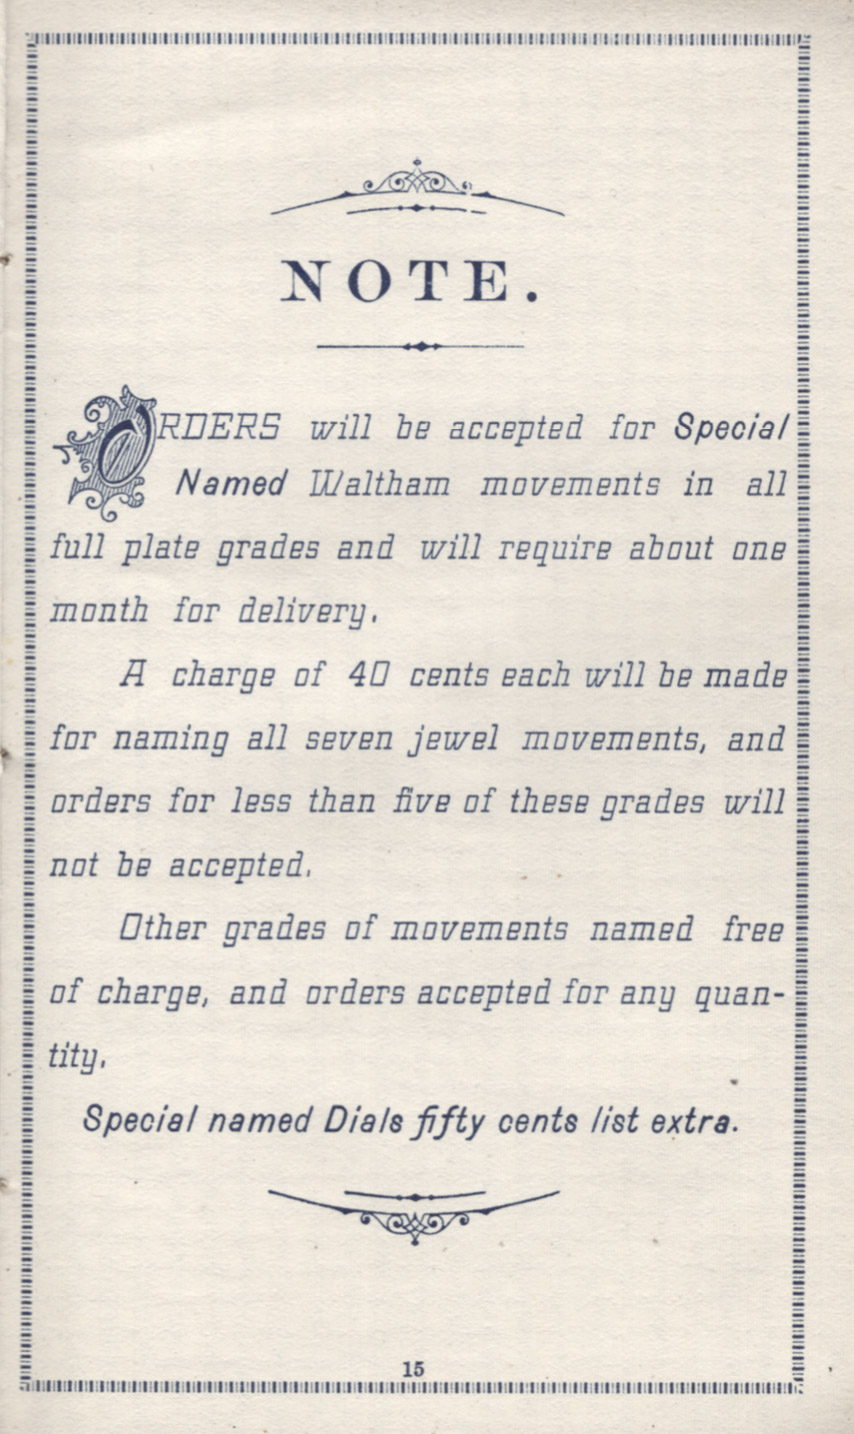 Waltham Private Label Instructions from the 1886 Robbins & Appleton Price List Catalog